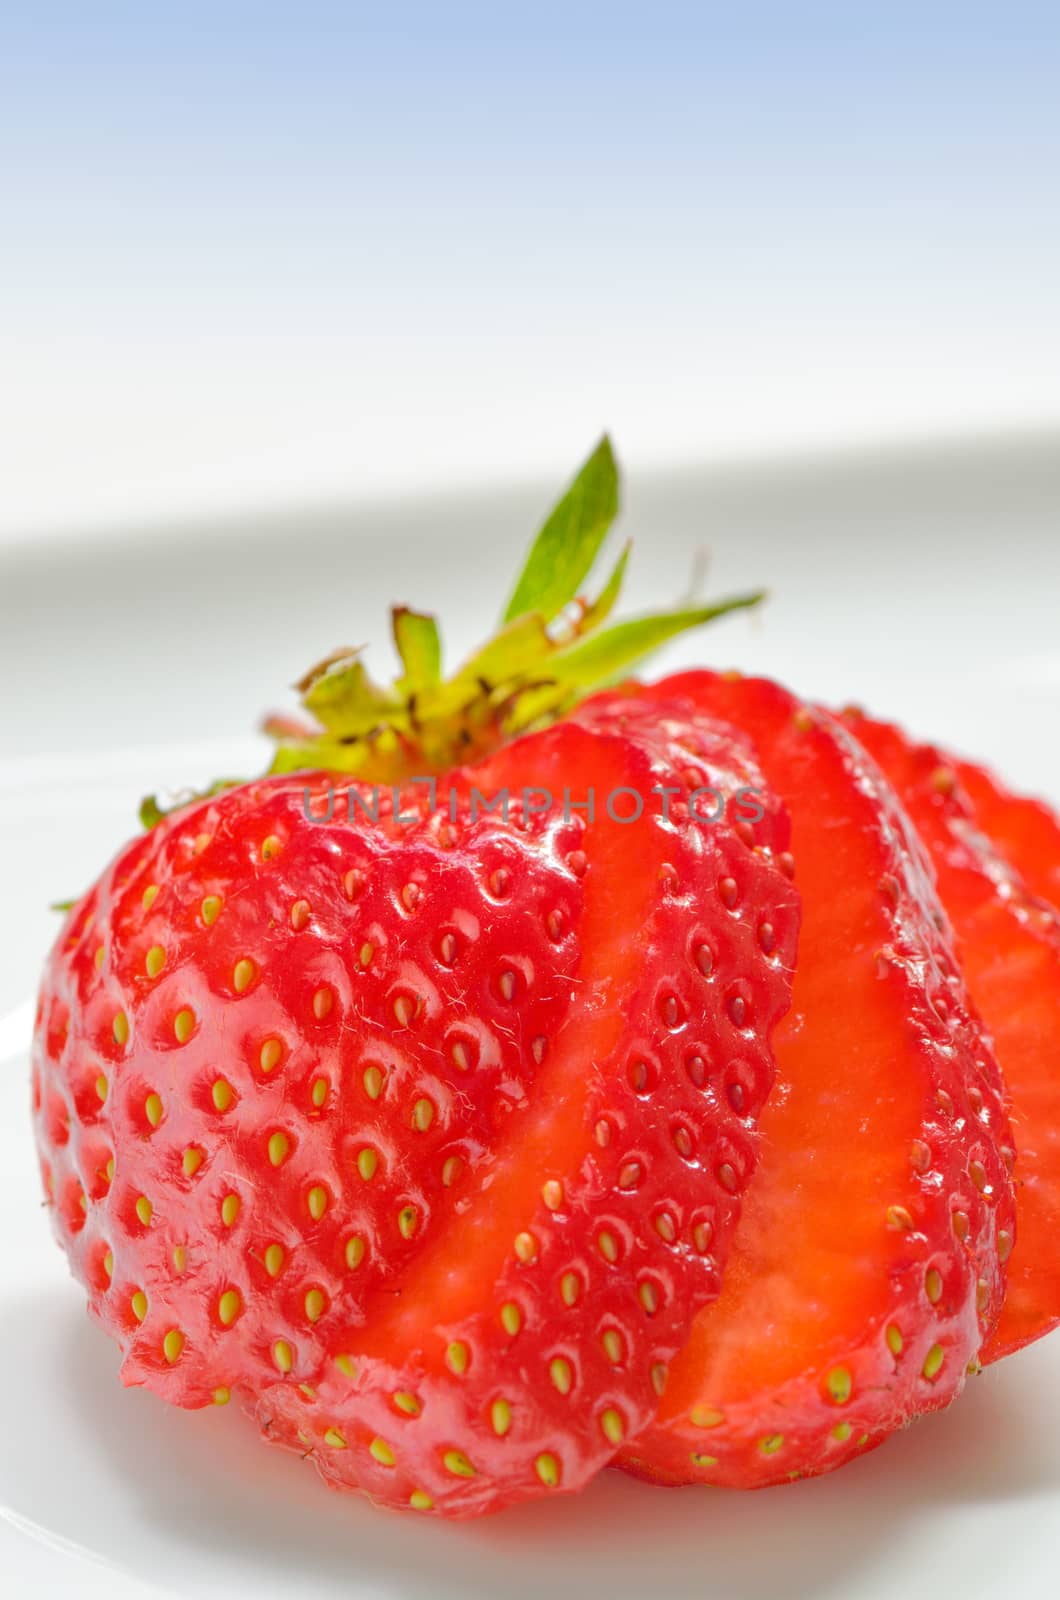 Strawberry slices on white background by mady70